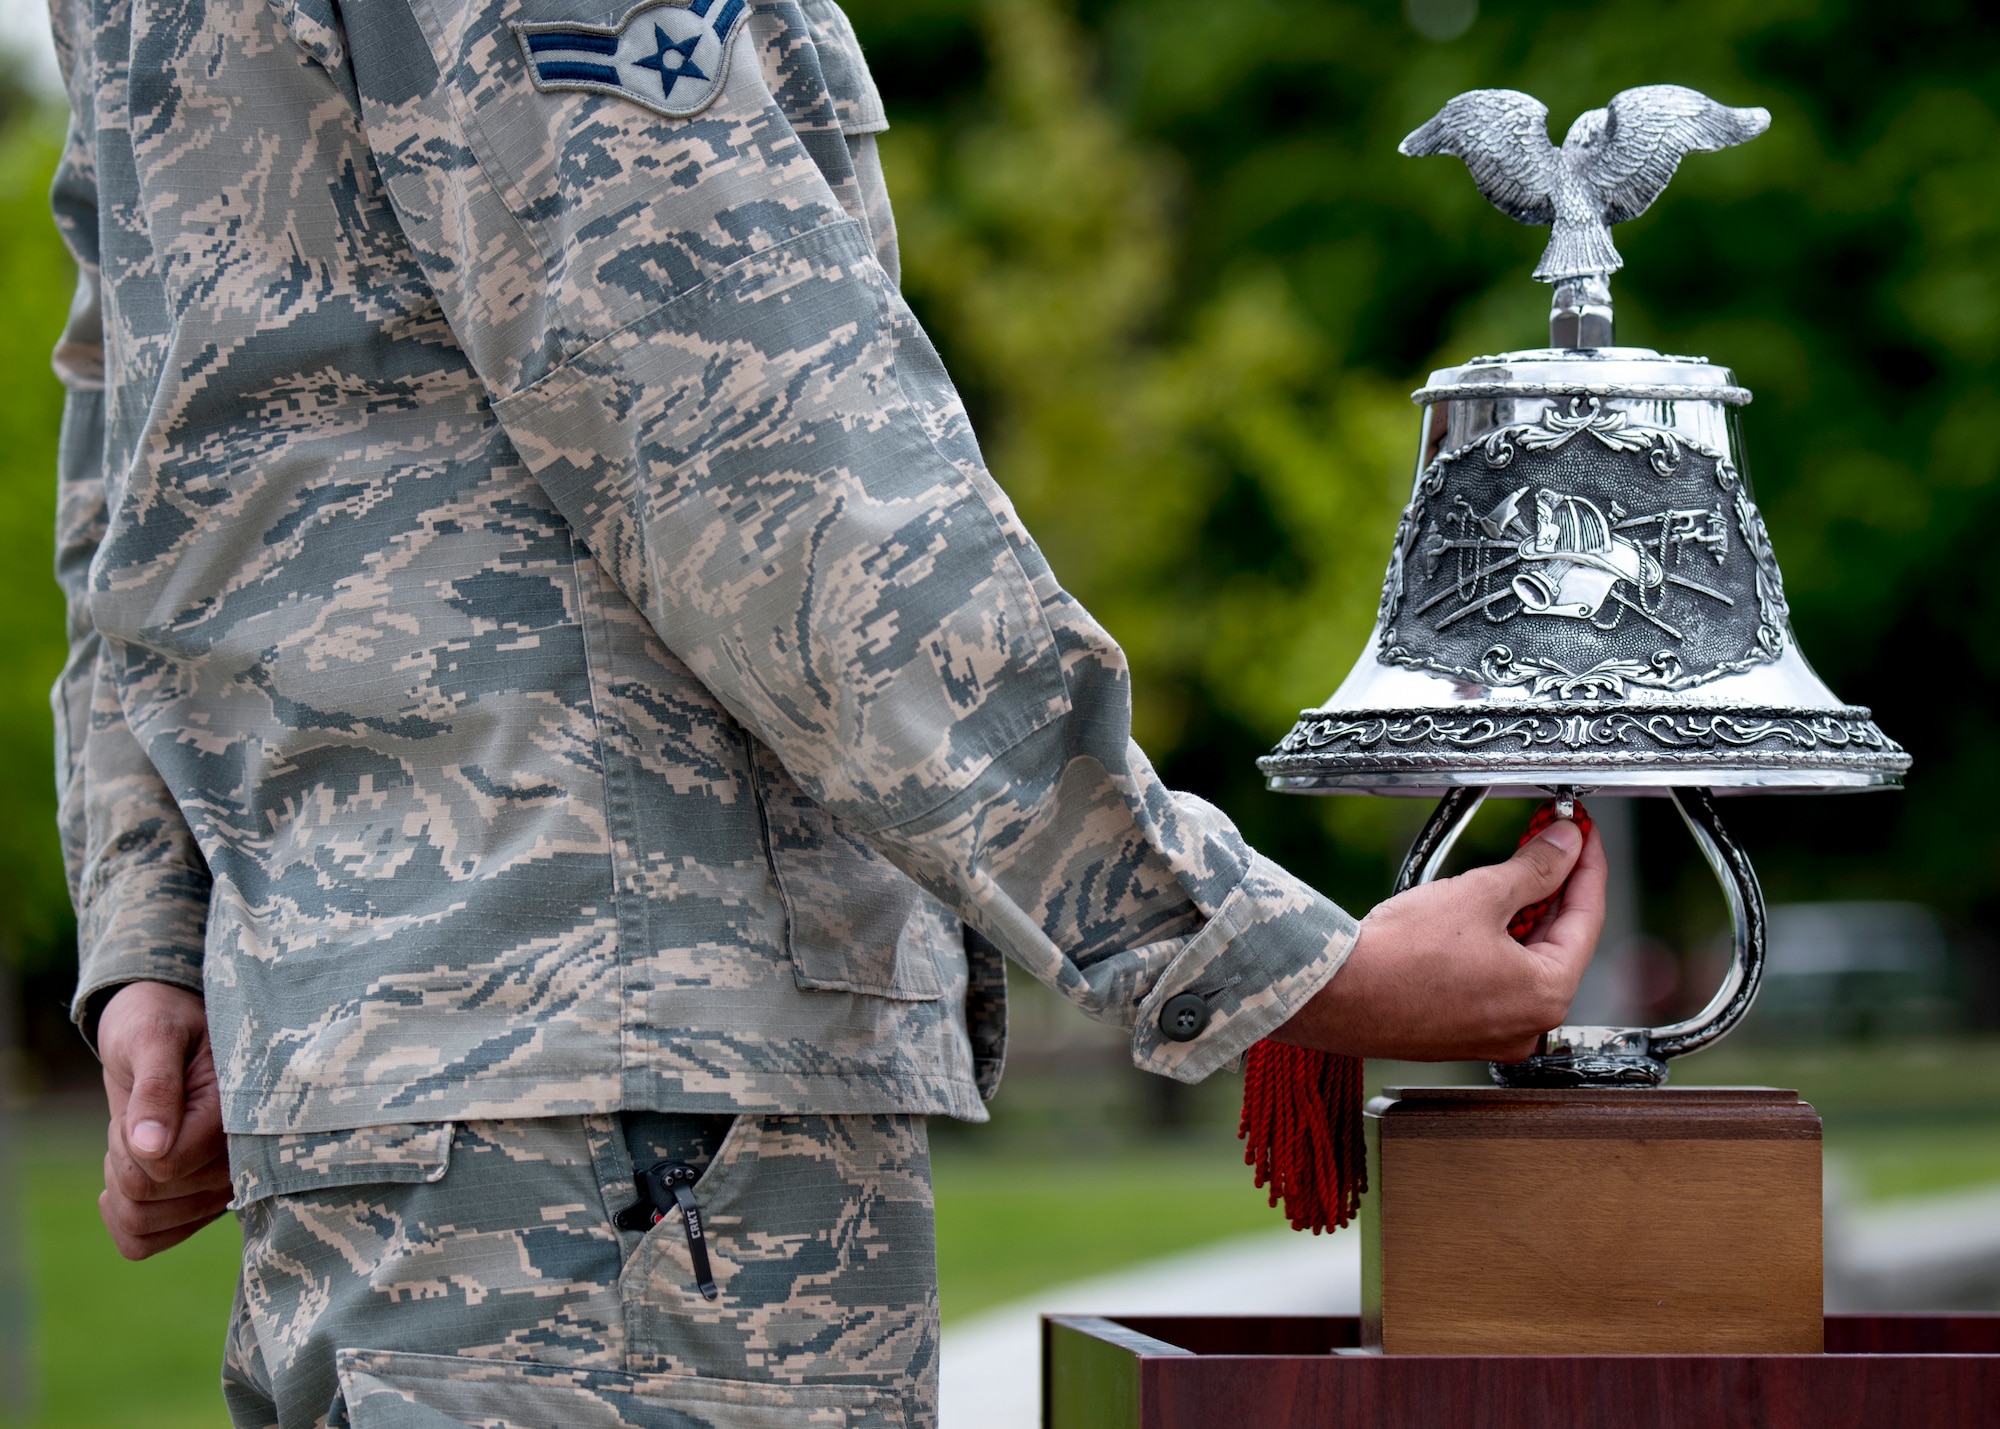 U.S. Air Force Airman 1st Class Ponce Francisco, 92nd Security Forces Squadron installation entry controller, rings a bell in remembrance of fallen law enforcement officers during a National Police Week Memorial Retreat Ceremony at Fairchild Air Force Base, Washington, May 15, 2019. The law enforcement community is honored annually with numerous events after President John F. Kennedy signed a proclamation in 1962 to designate May 15 as Peace Officers Memorial Day and the week as National Police Week. (U.S. Air Force photo by Airman 1st Class Whitney Laine)